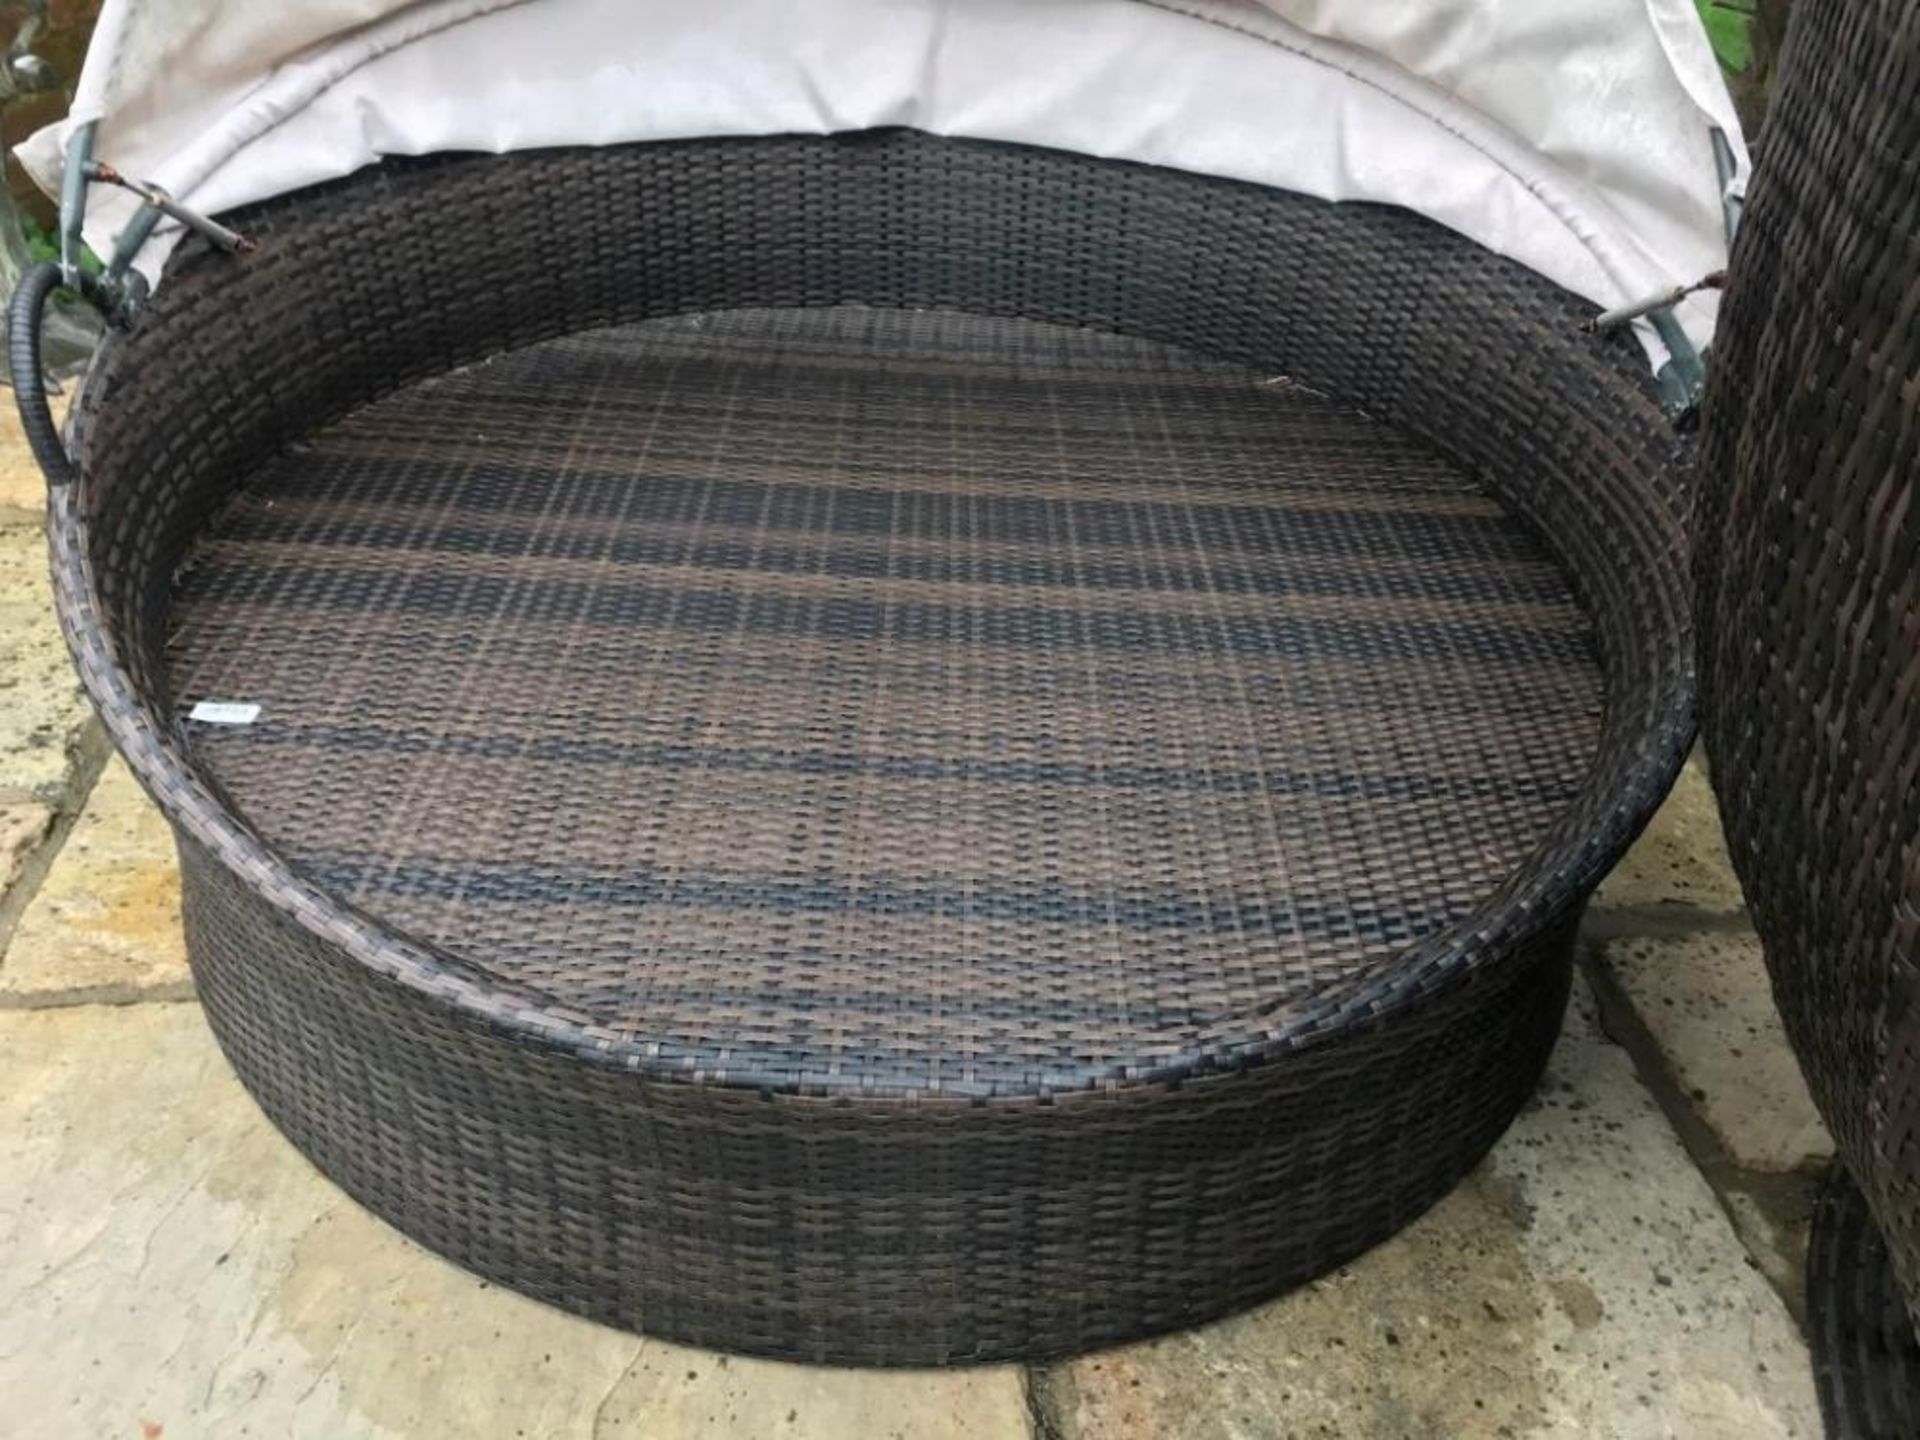 1 x Wicker / Rattan Round Daybed With Fabric Sun Hood - Ref: JB165 - Pre-Owned - NO VAT ON THE HAMME - Image 4 of 7